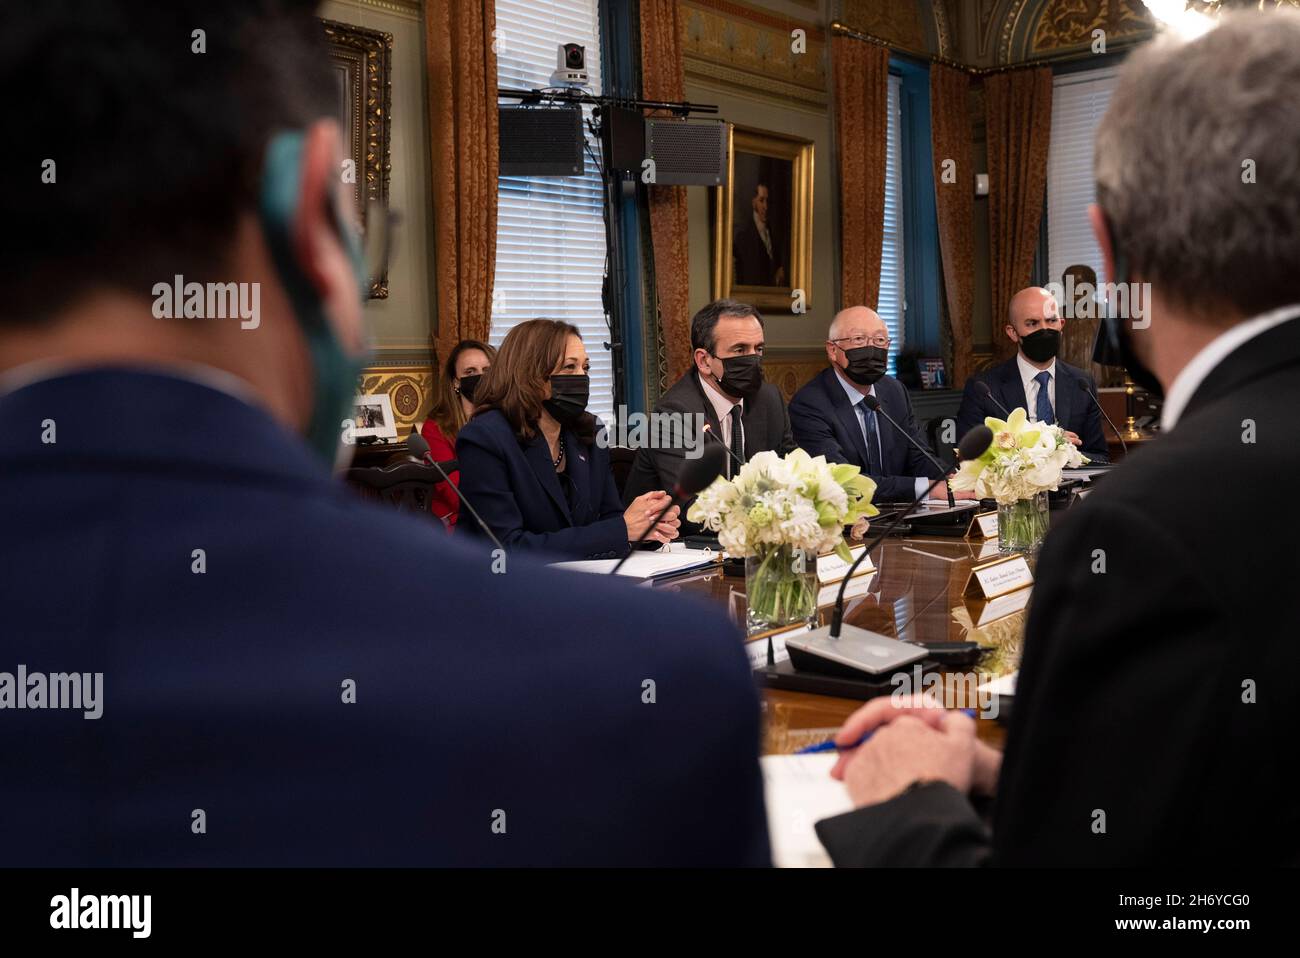 United States Vice President Kamala Harris hold a bilateral meeting with President López Obrador of Mexico in the Vice Presidents Ceremonial Office in the Eisenhower Executive Office Building November 18, 2021. Credit: Ken Cedeno/Pool via CNP /MediaPunch Stock Photo